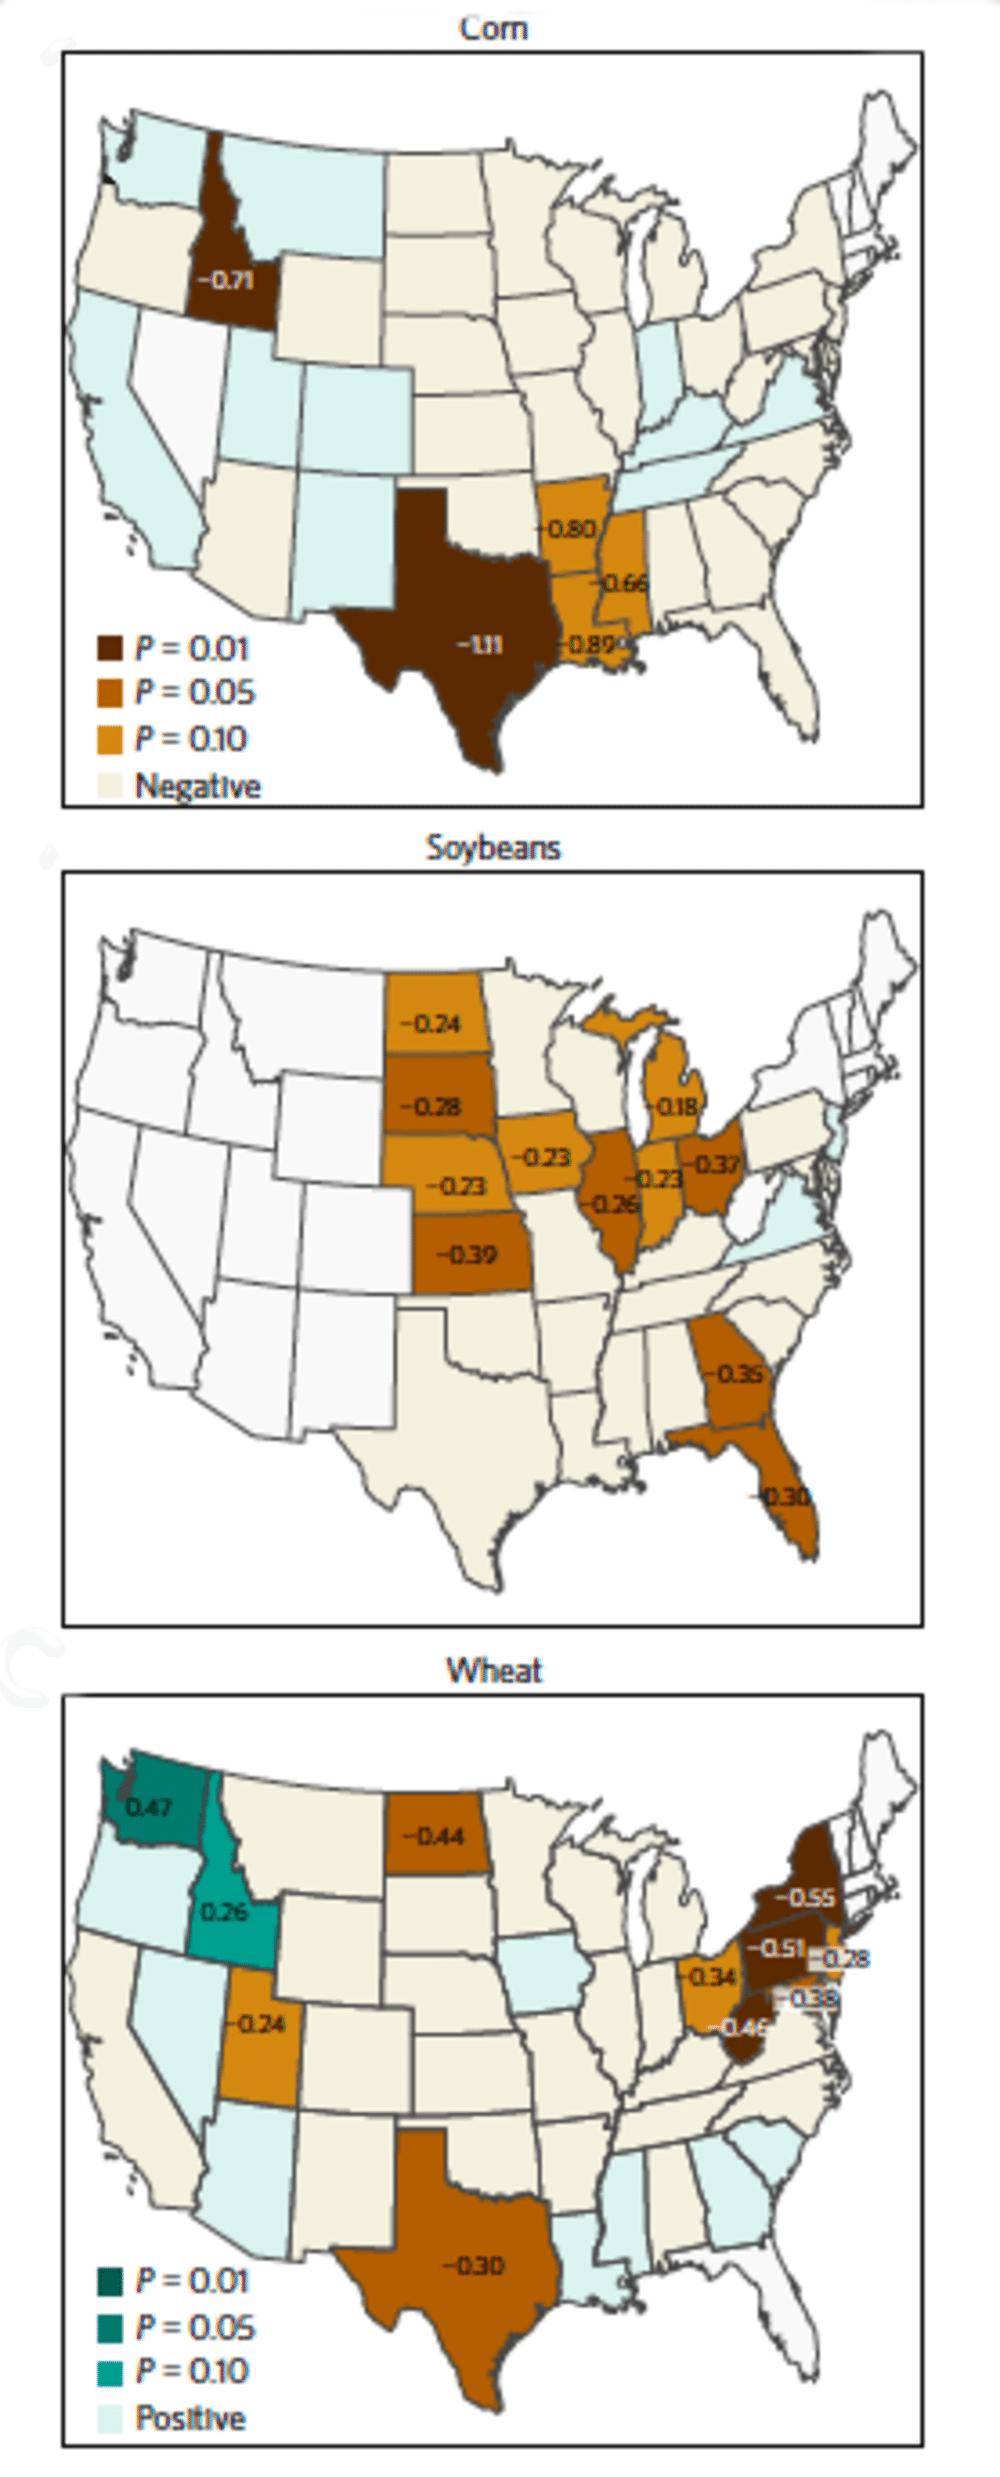 Impacts of Arctic warming on United States crop yields. Light brown and green indicate non-significant states and white means undefined states due to the lack of crop-yield data.